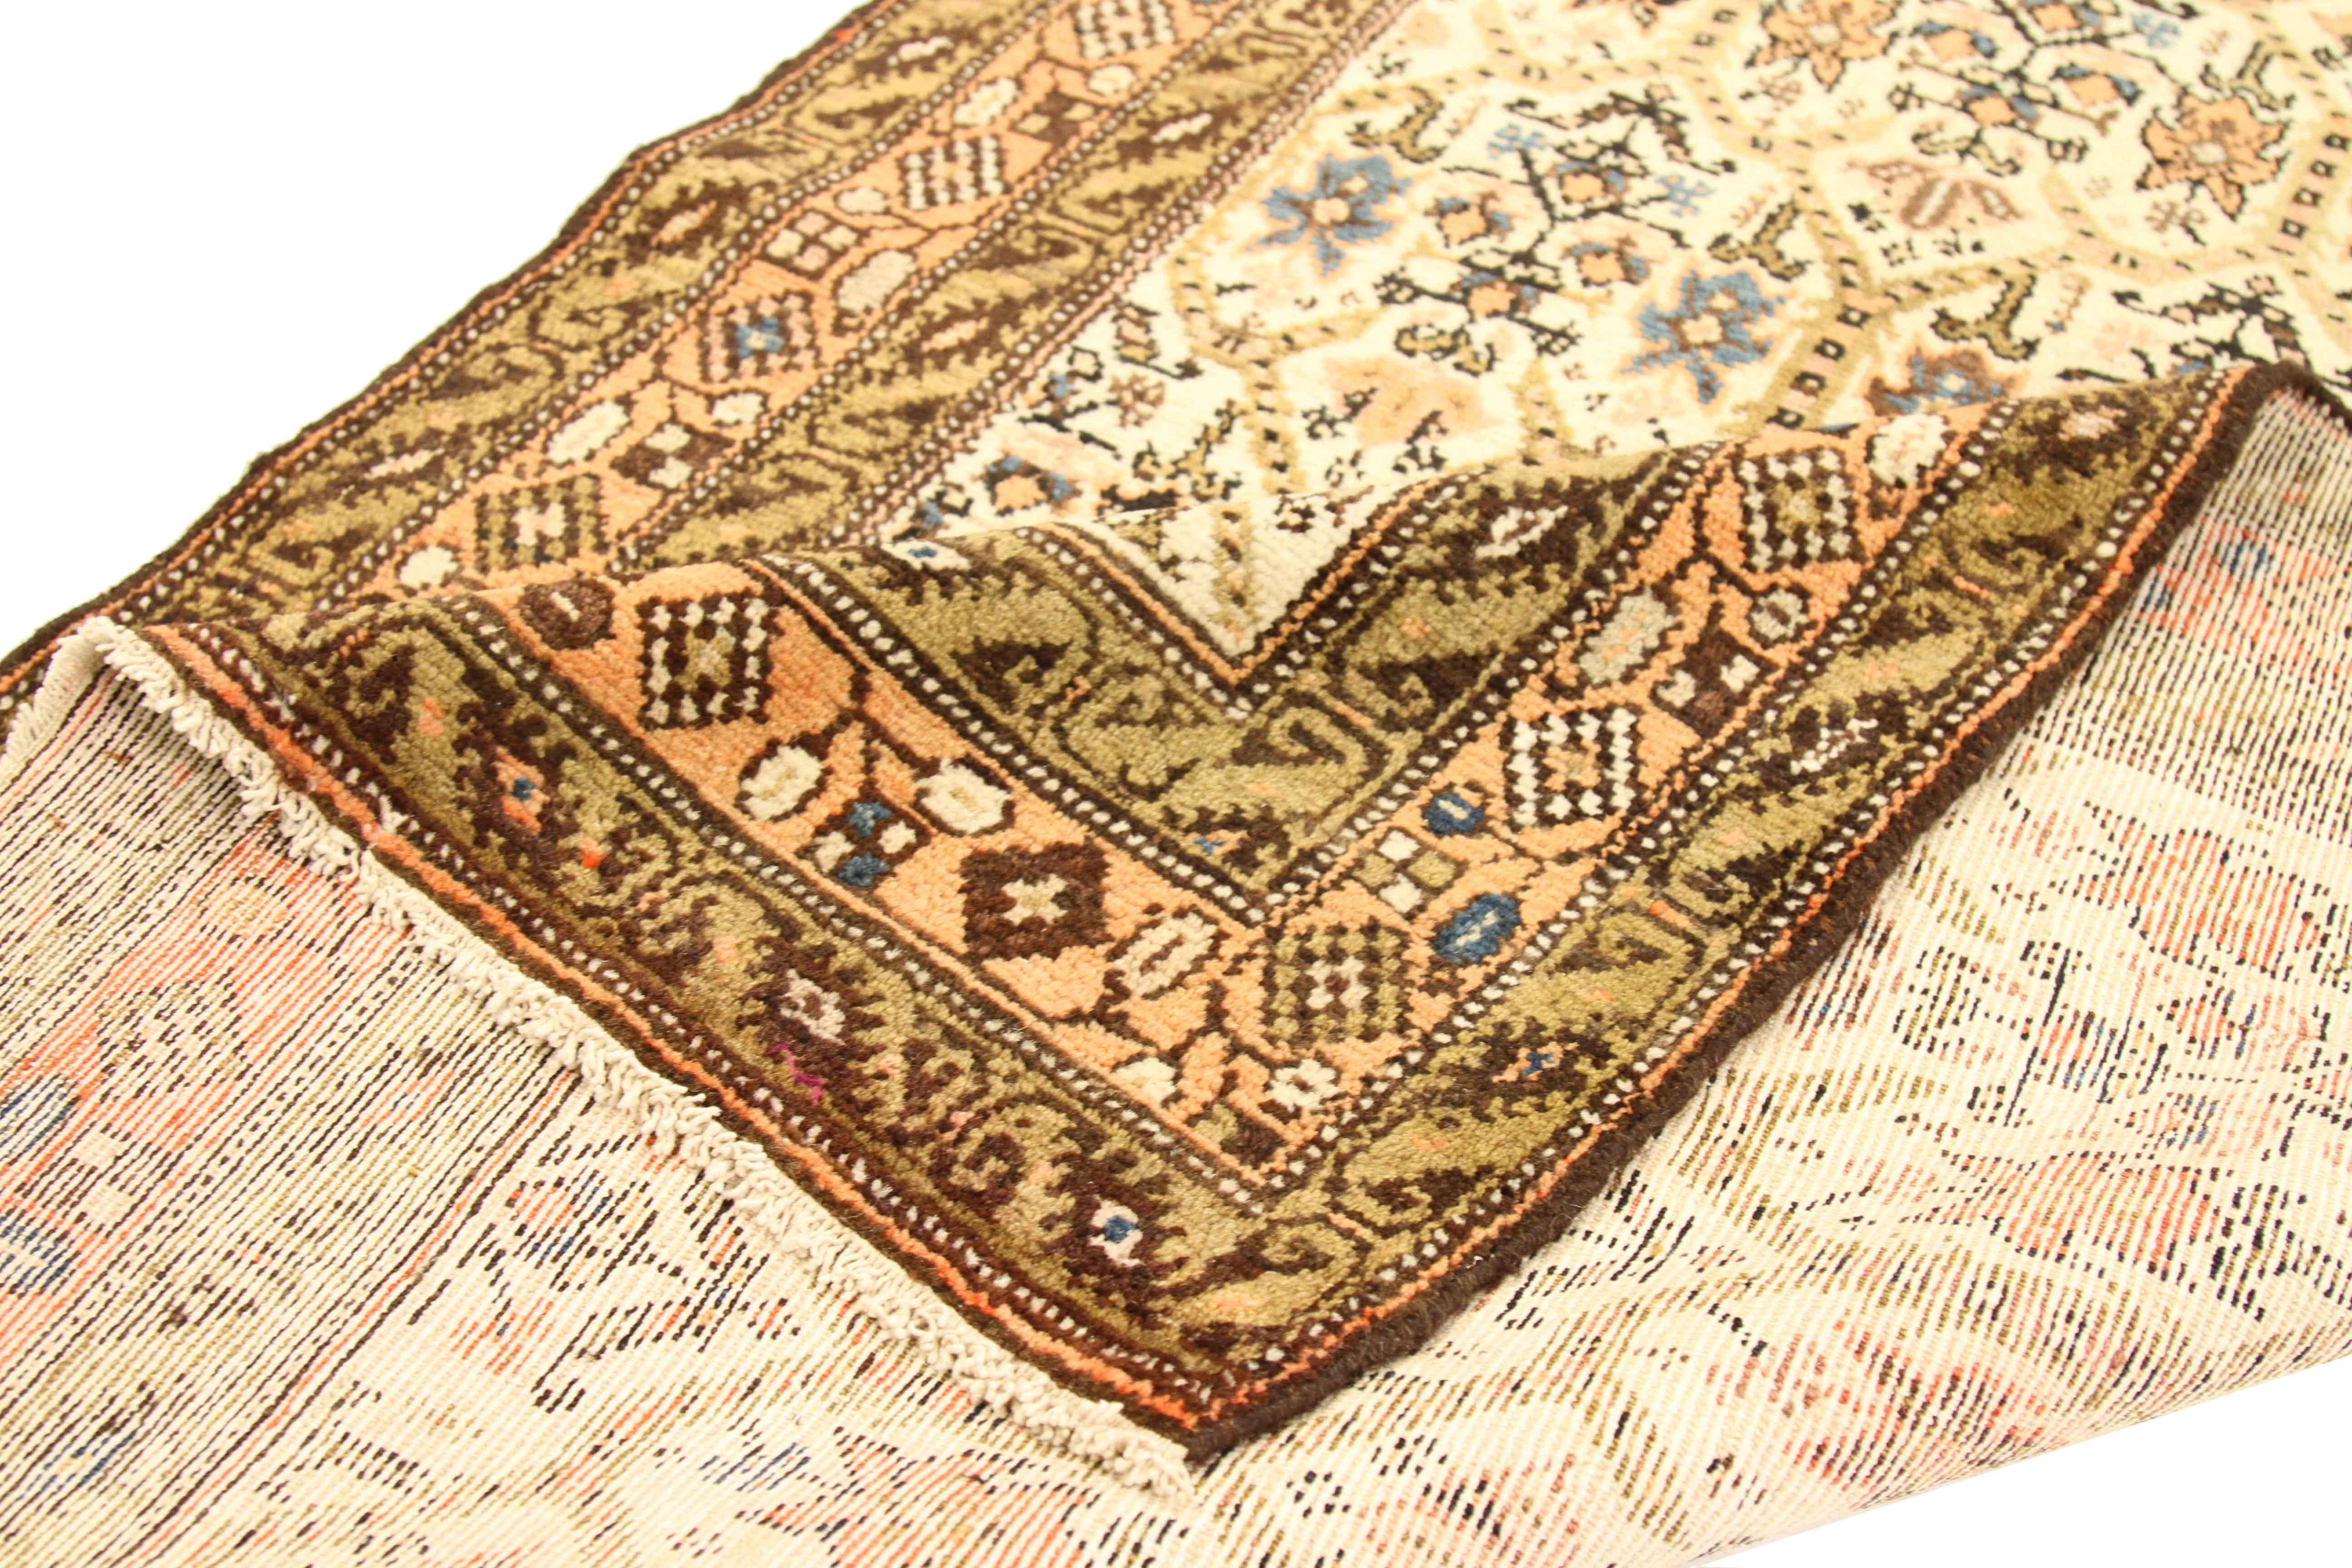 Handmade from the finest wool and organic dyes, this antique Persian rug features an exceptional floral pattern using a unique color blend of blue, green, ivory and yellow. It’s a fine example of the artistry of Malayer weavers and is an excellent